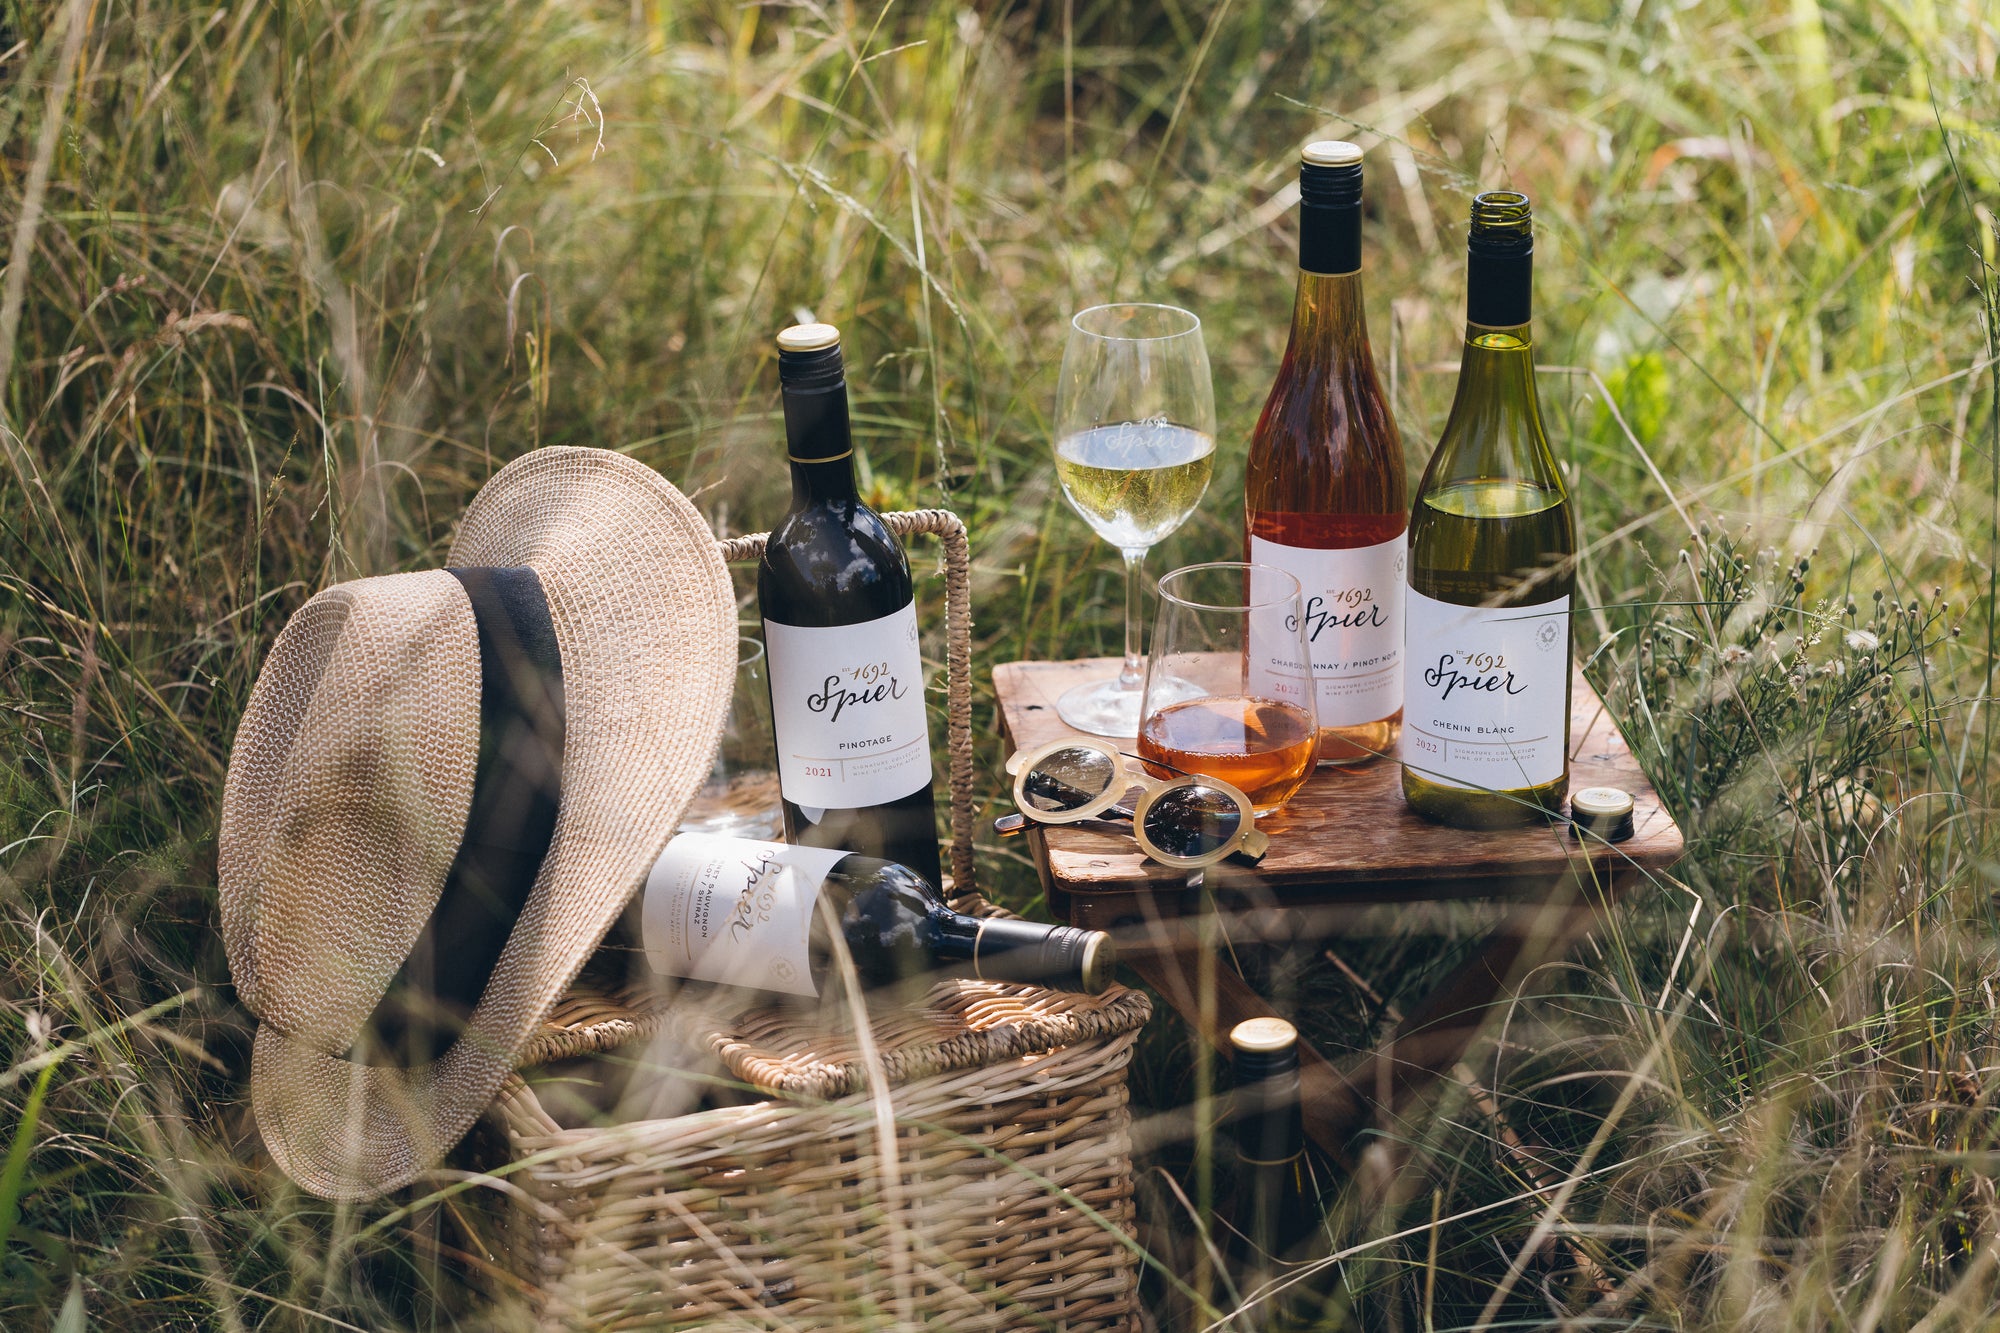 Spier Signature Collection of wines from Stellenbosch, South Africa.